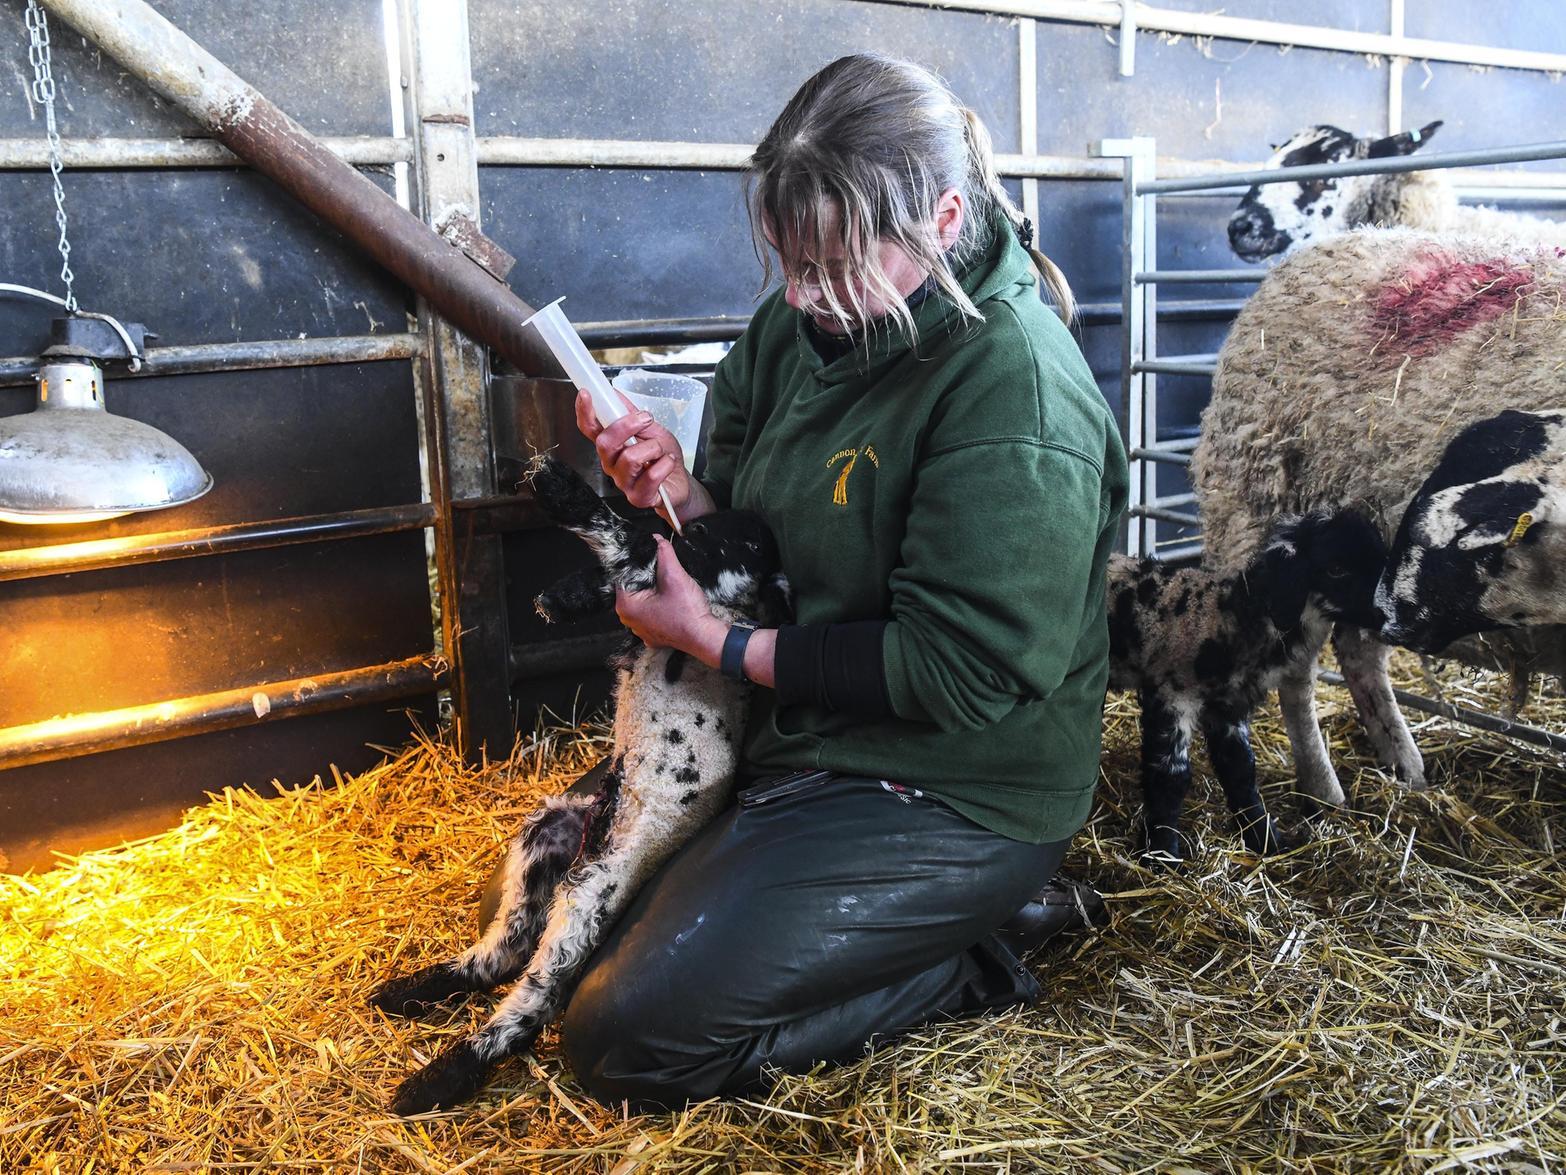 The lambs are weaned from their mothers between two and four months old, when they will either go on to be breeding sheep or be reared for meat.